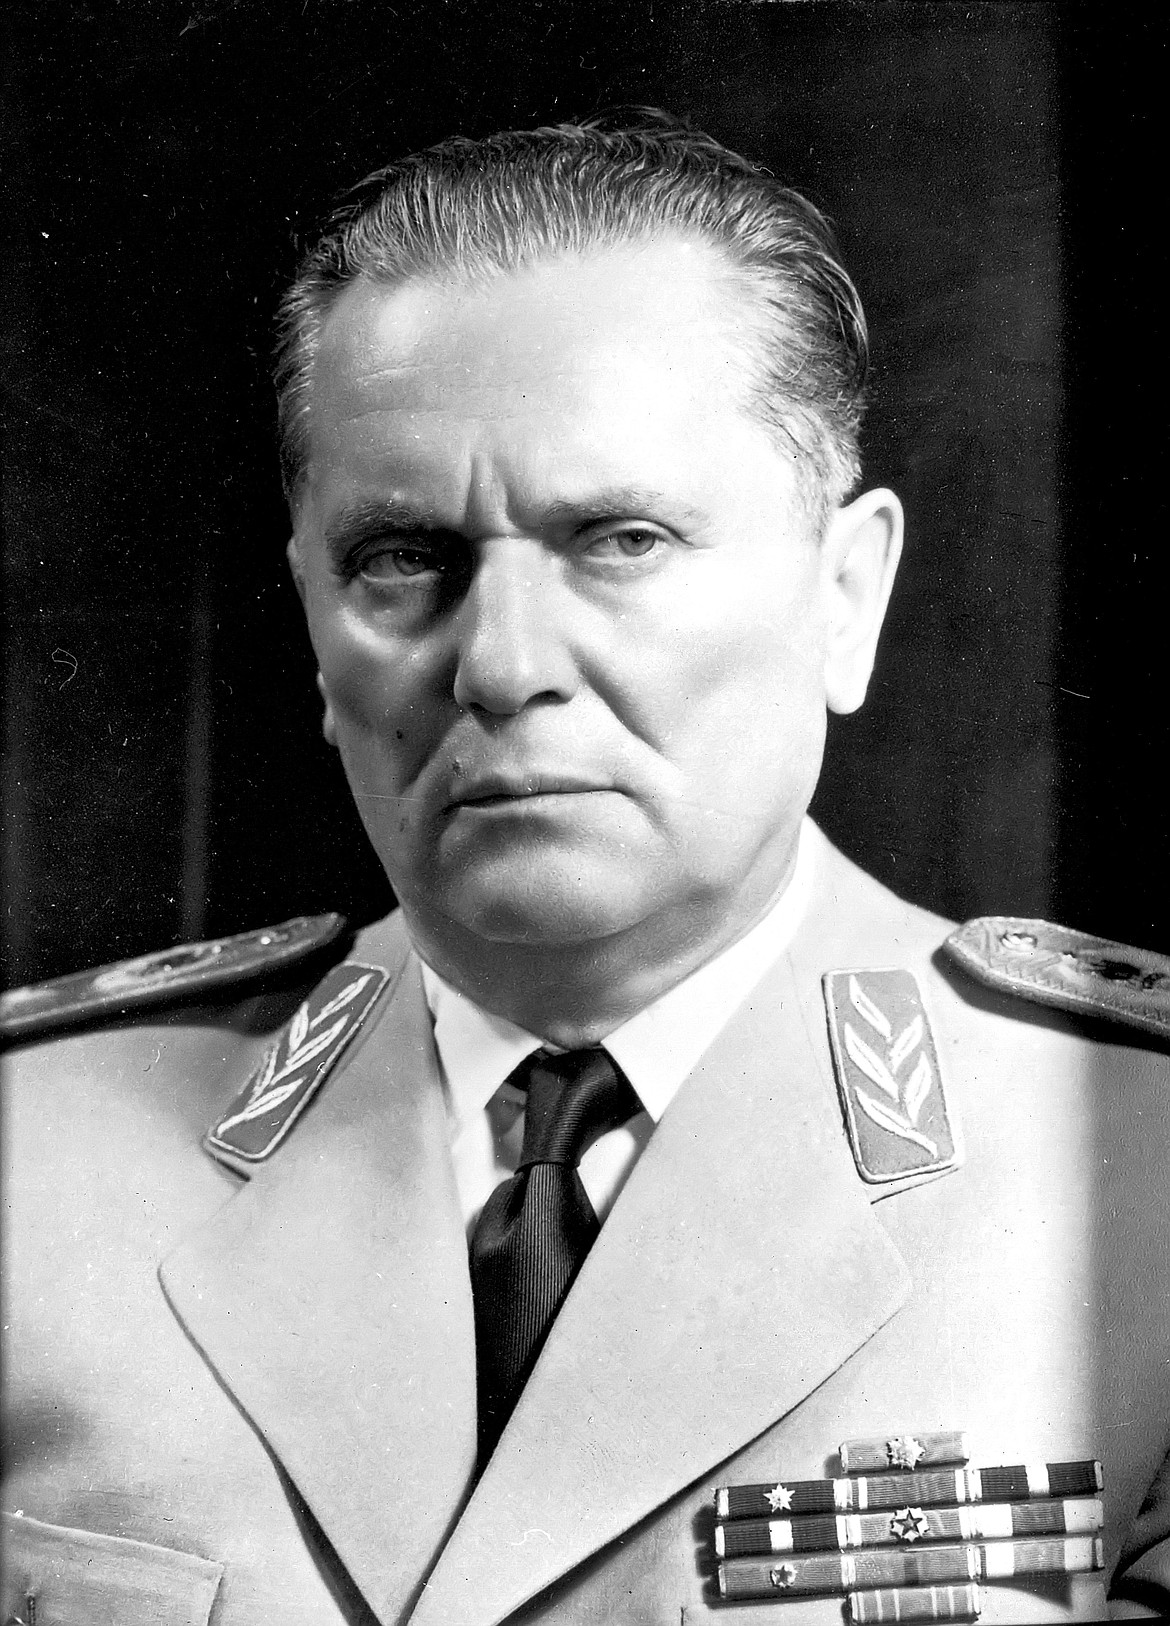 Josef Broz Tito was leader of the Yugoslav Communists guerrillas fighting the Germans — as well as the rival anti-Communist Chetniks who were also battling the Nazi occupation forces.